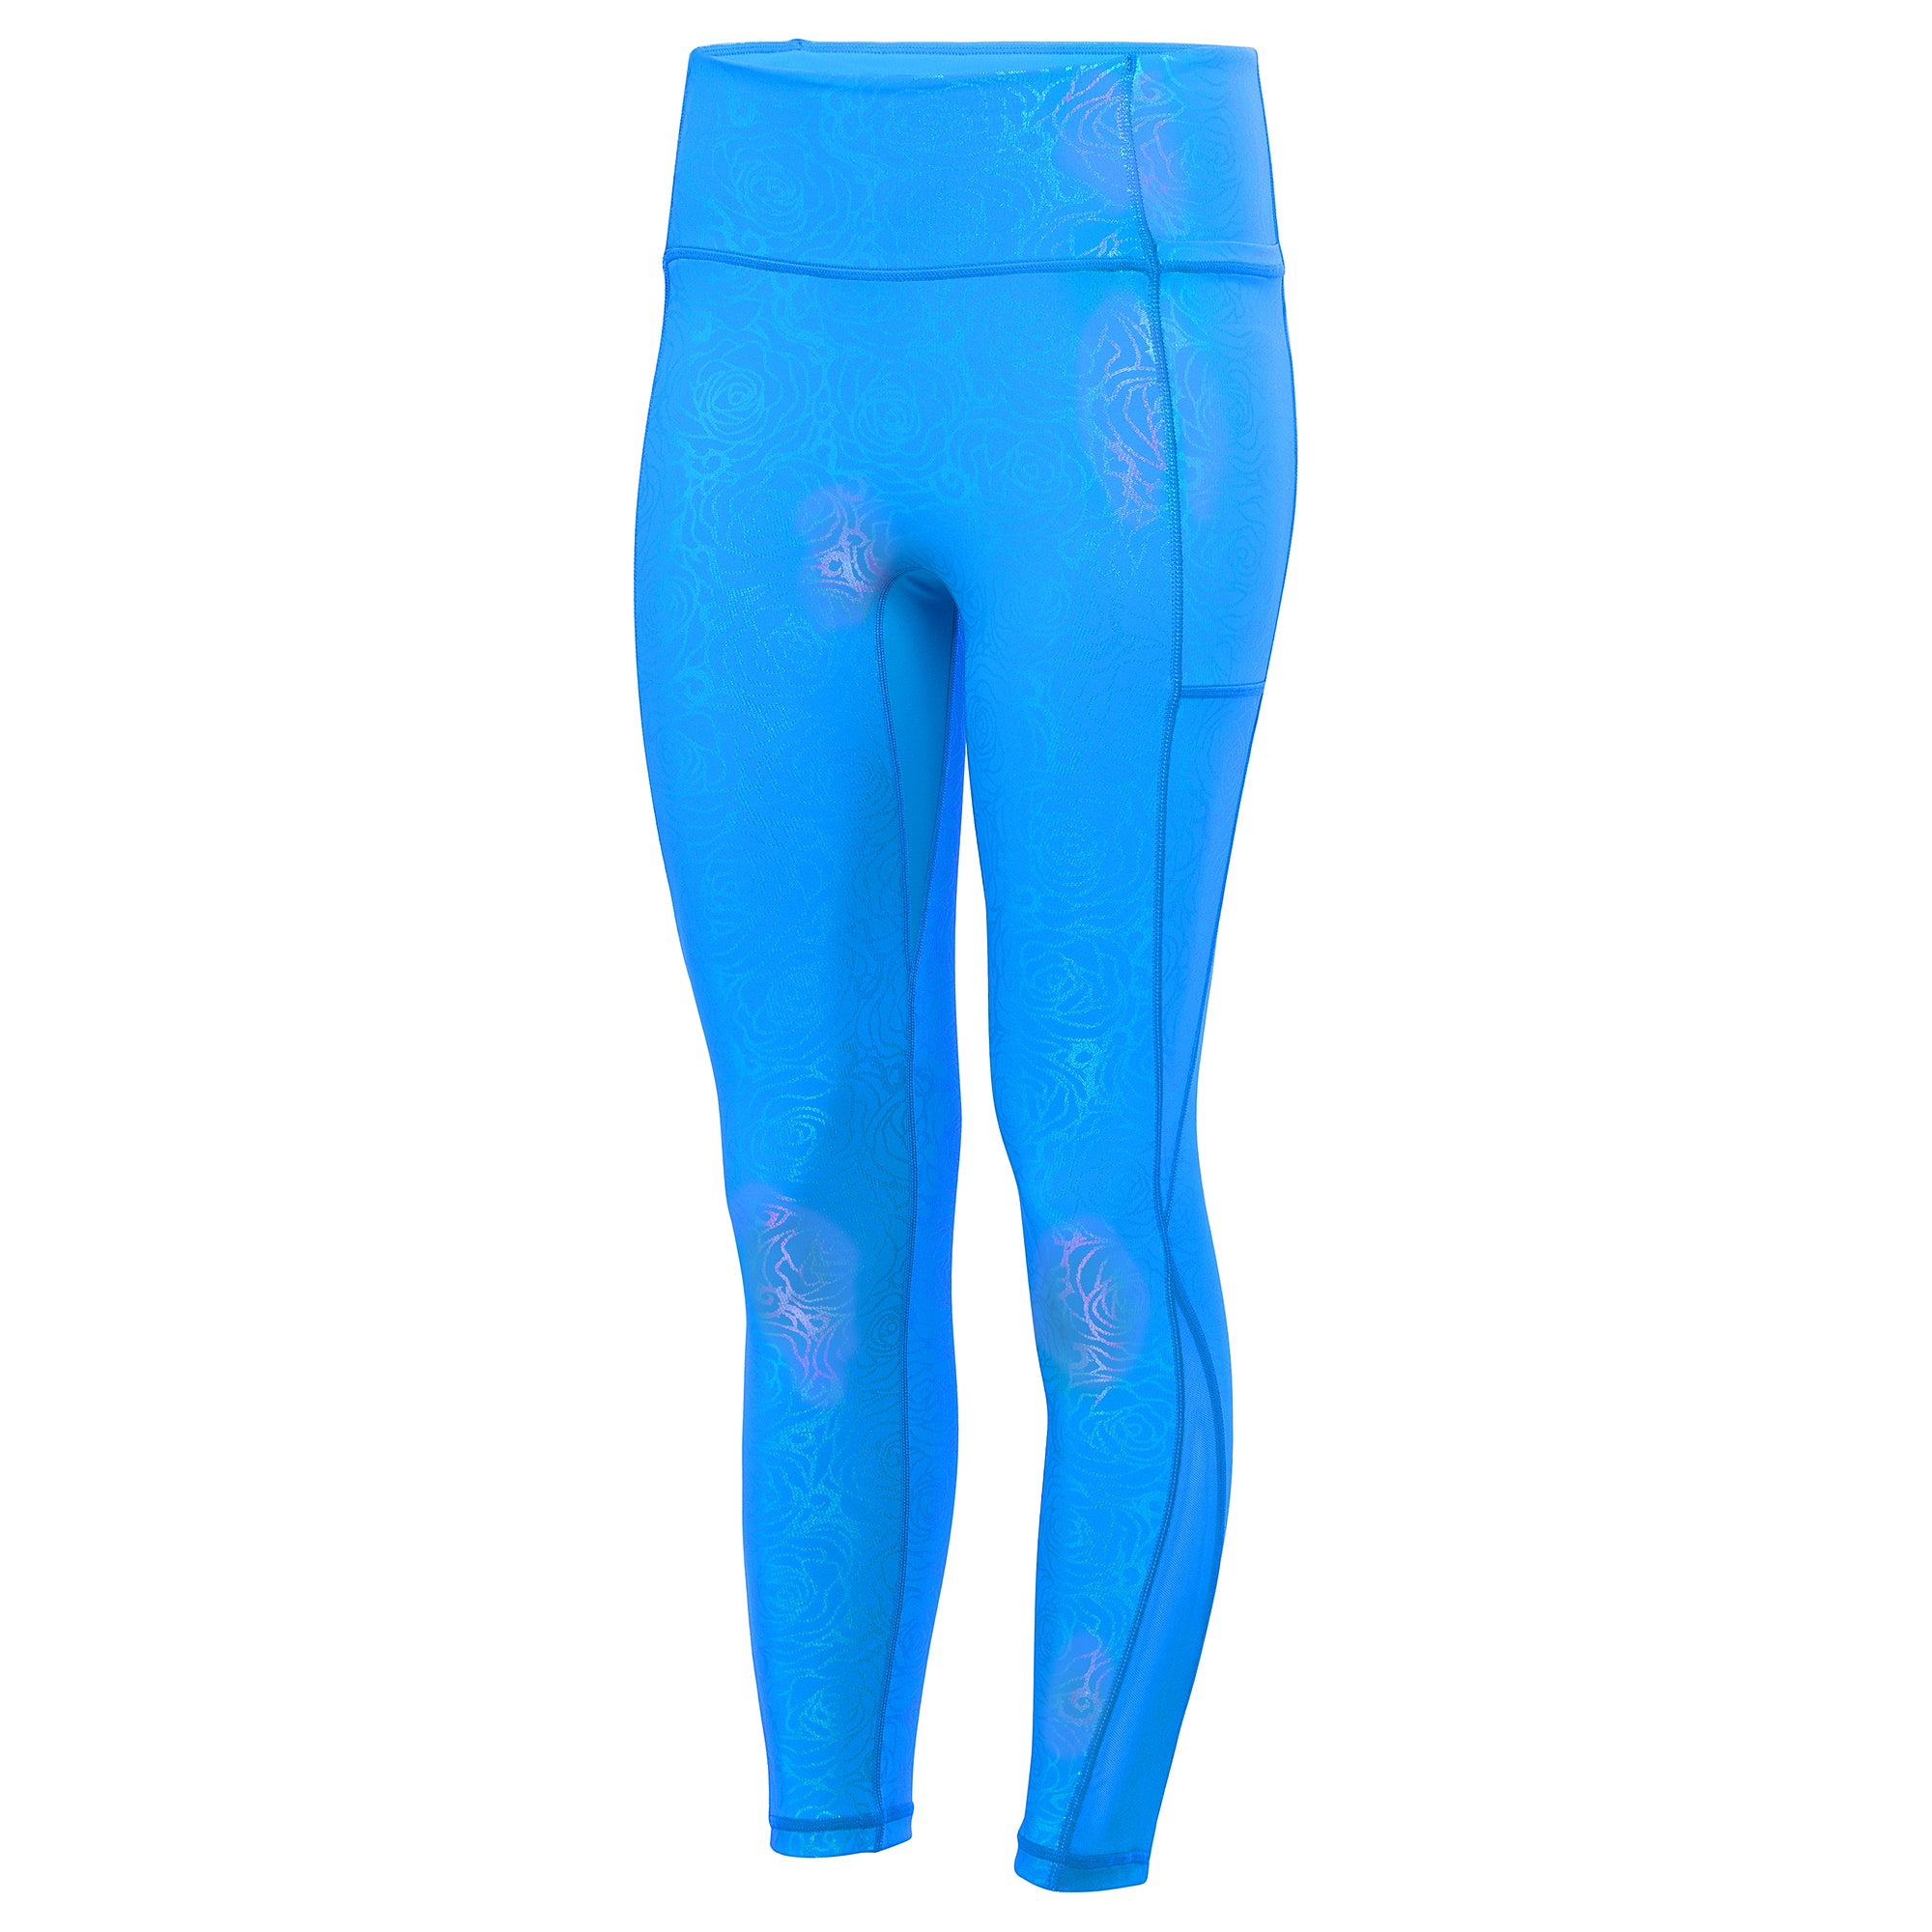 Zyia Active Women's Royal Blue Patterned High Waisted 7/8 Leggings